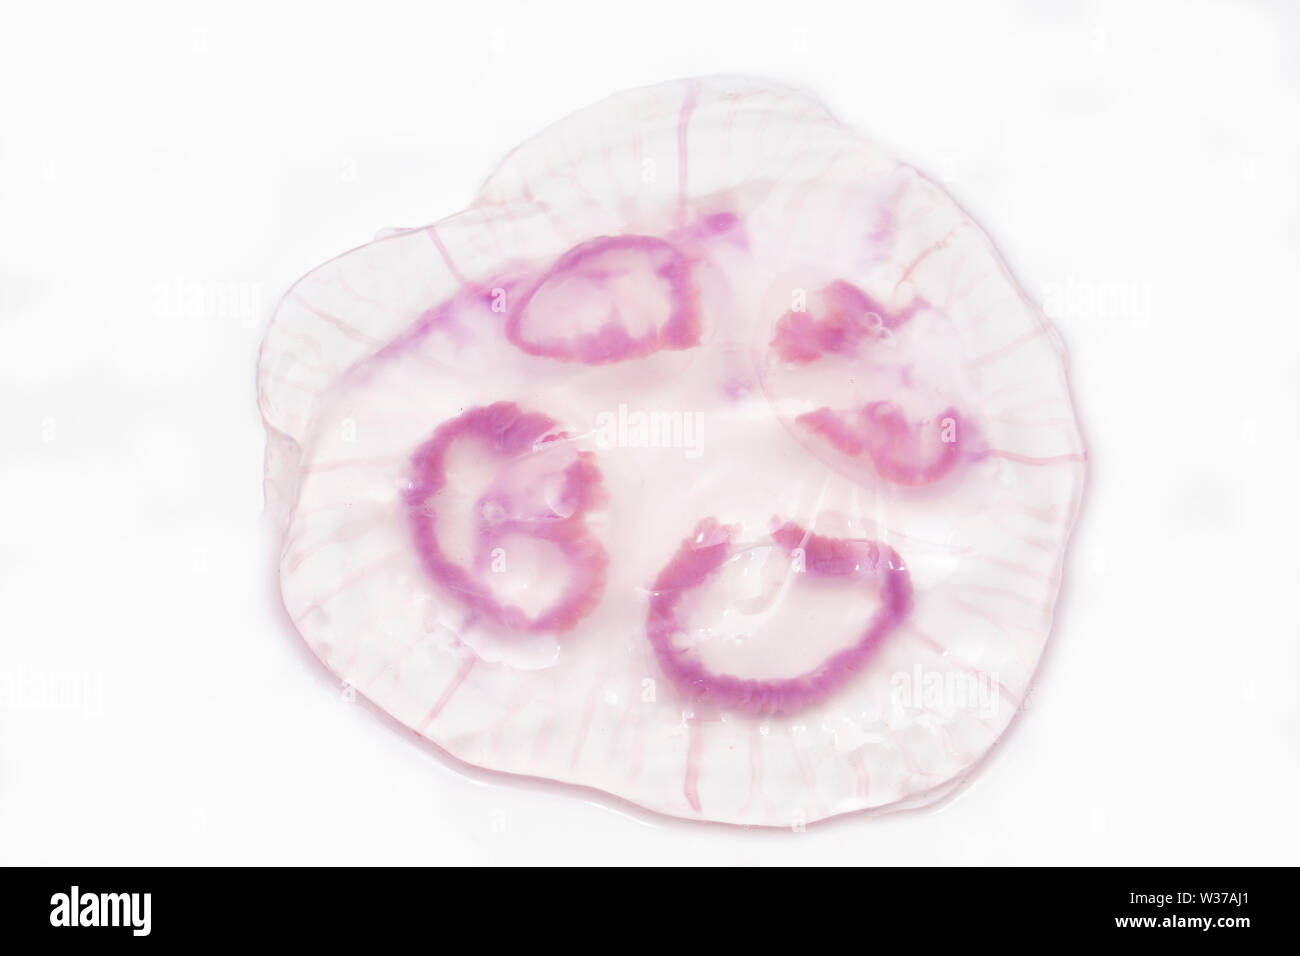 A Moon jellyfish, Aurelia aurita, found washed up on Chesil beach in Dorset and photographed on a white background. Dorset England UK GB. Stock Photo